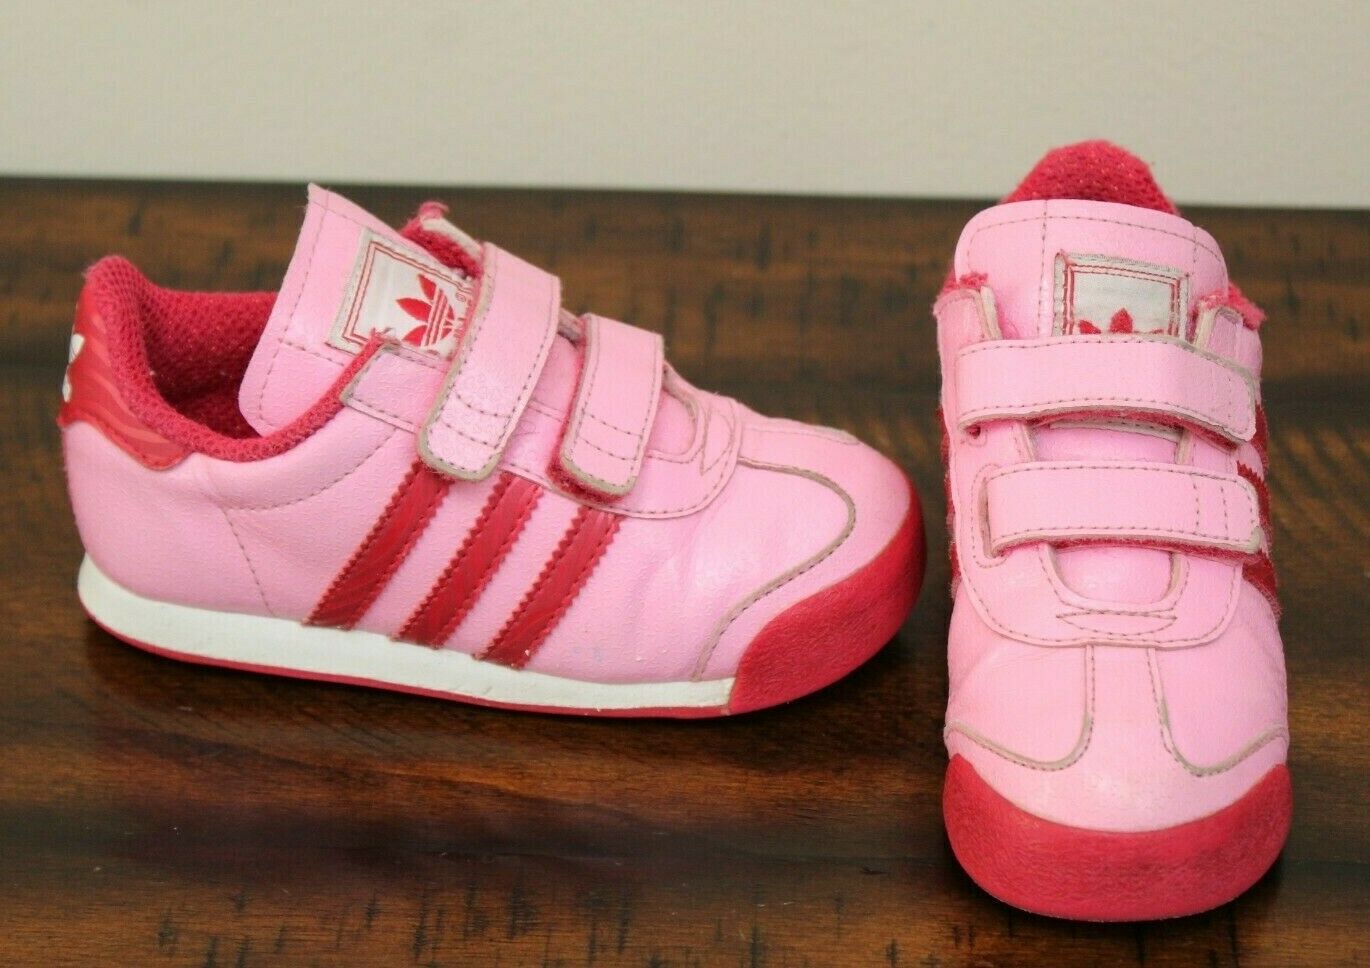 Adidas Grand Court PINK SNEAKERS sz 9 Toddler Girls Athletic Shoes Red Heart